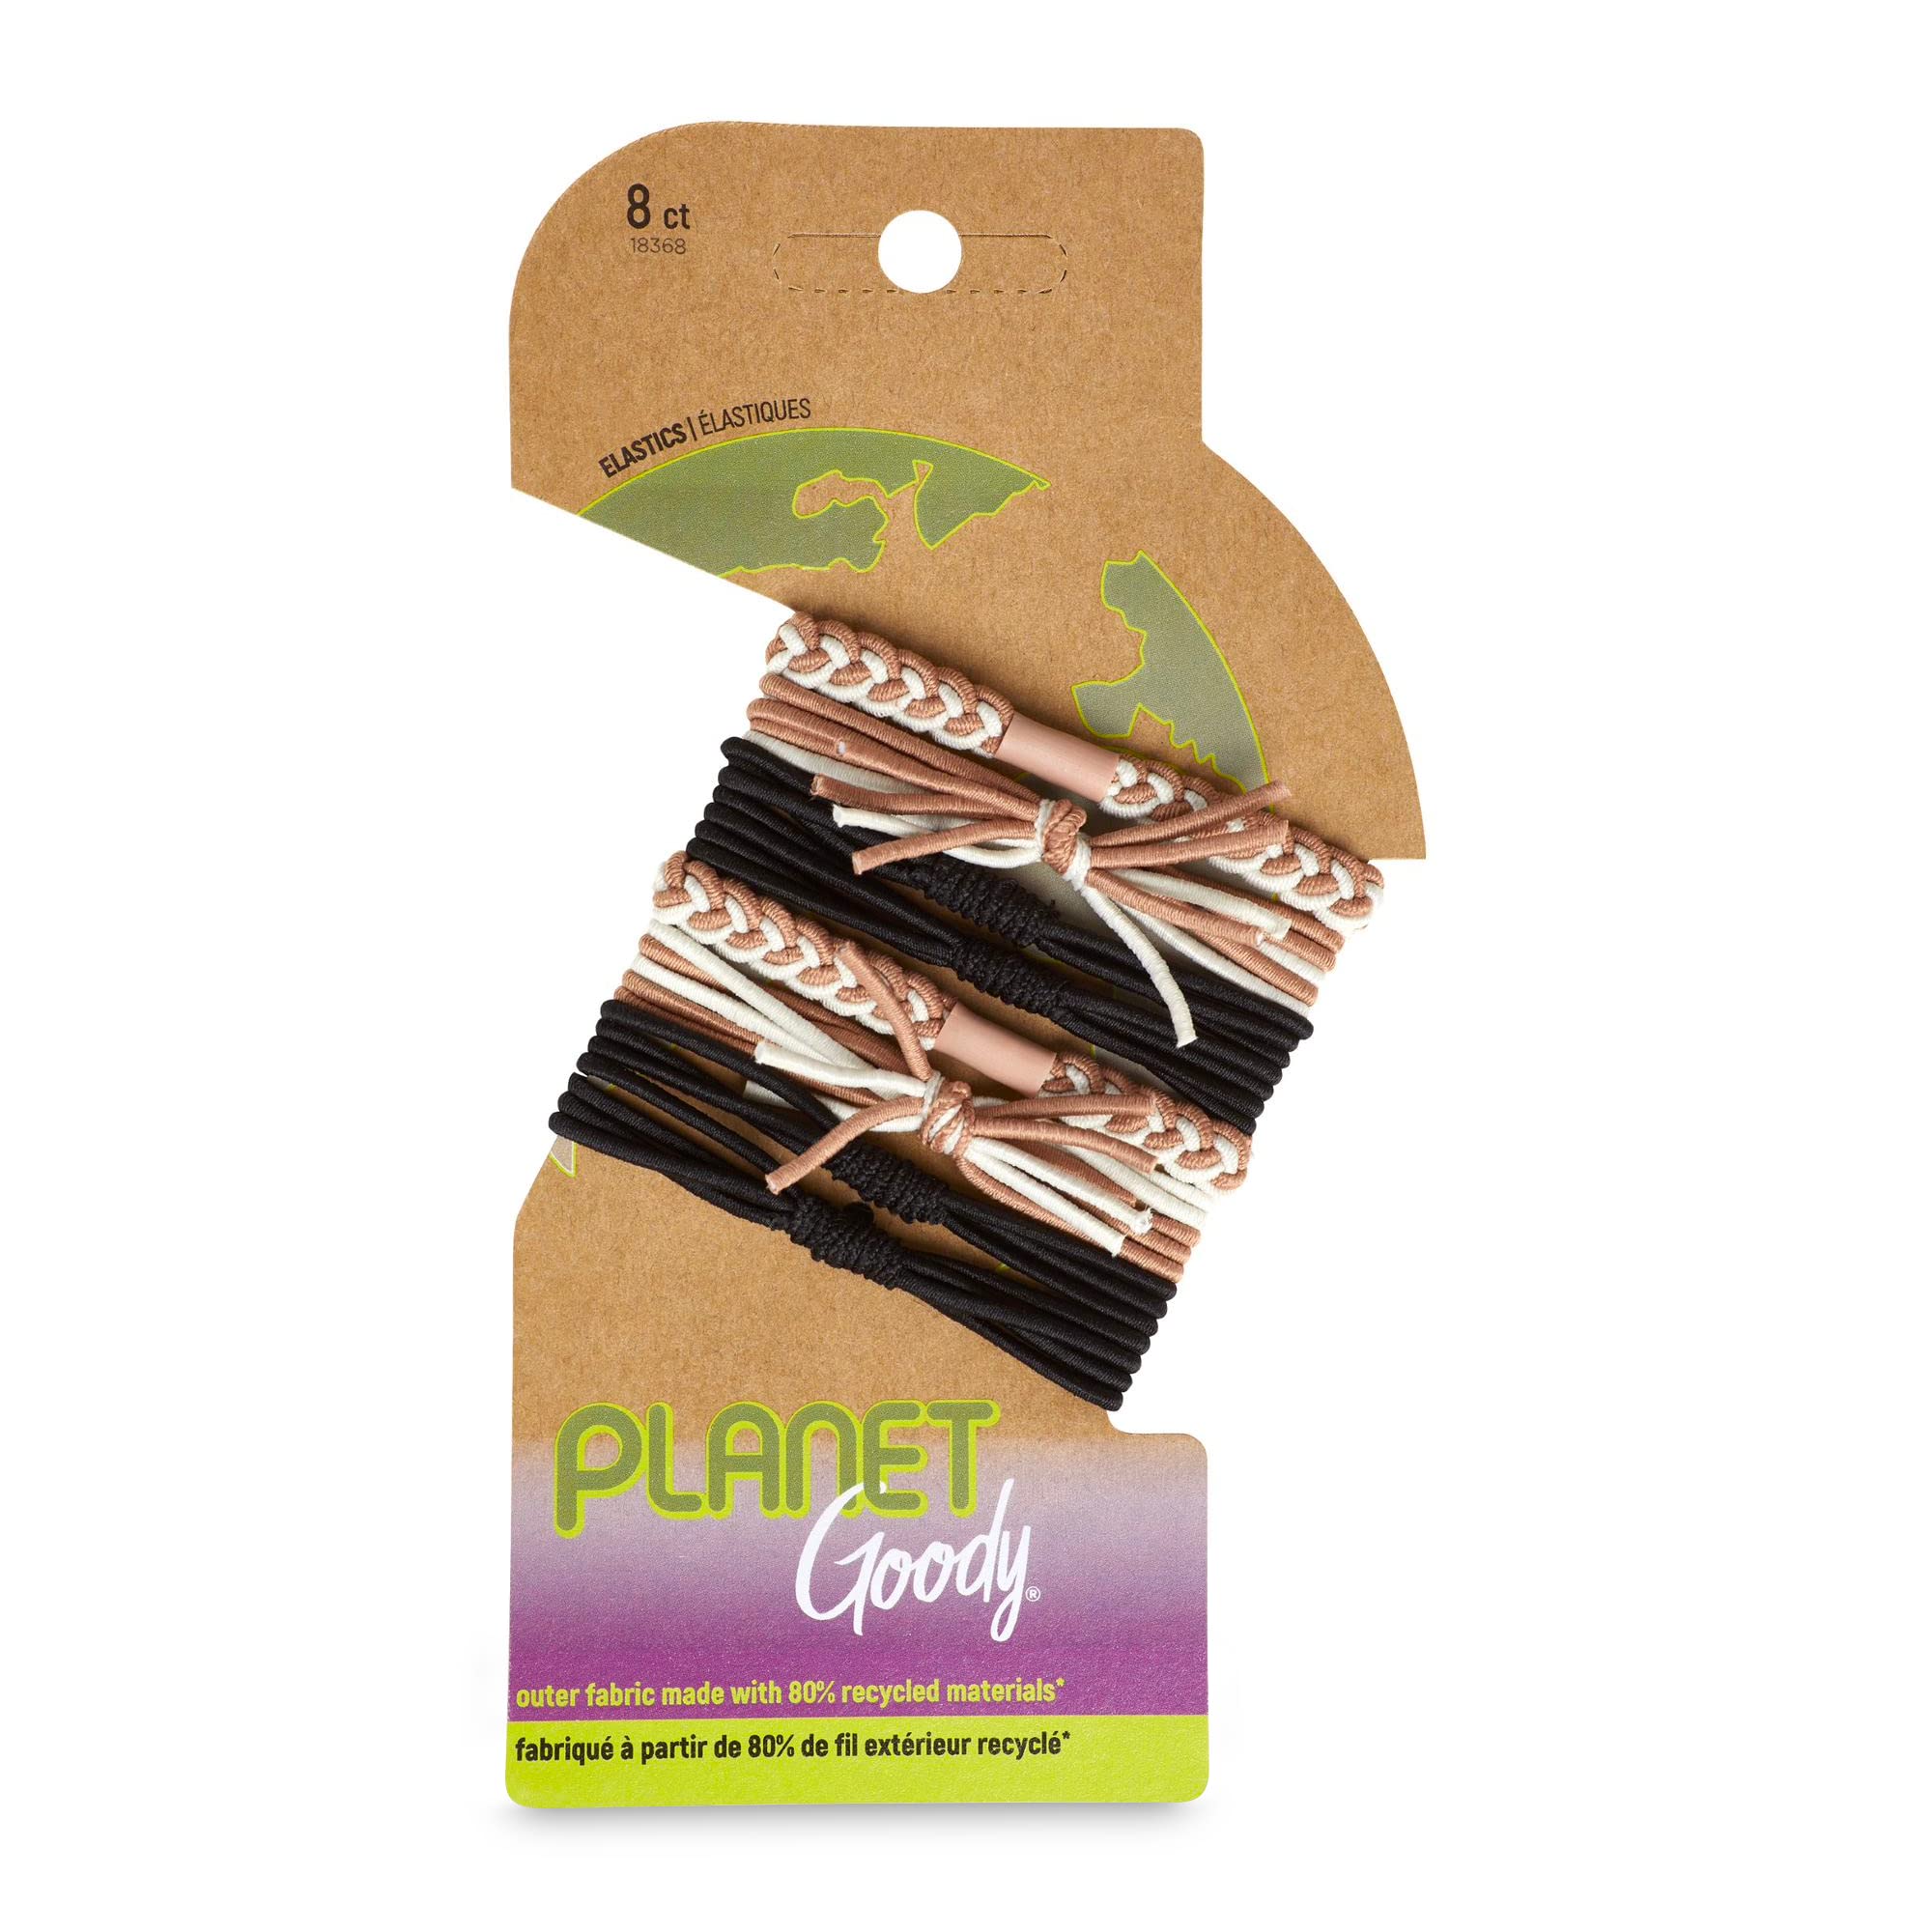 8-Count Planet Goody Ouchless Bracelet Hair Elastics (Black/Cream/Blush) $2.53 ($0.31 each) w/ S&S + Free Shipping w/ Prime or on $35+